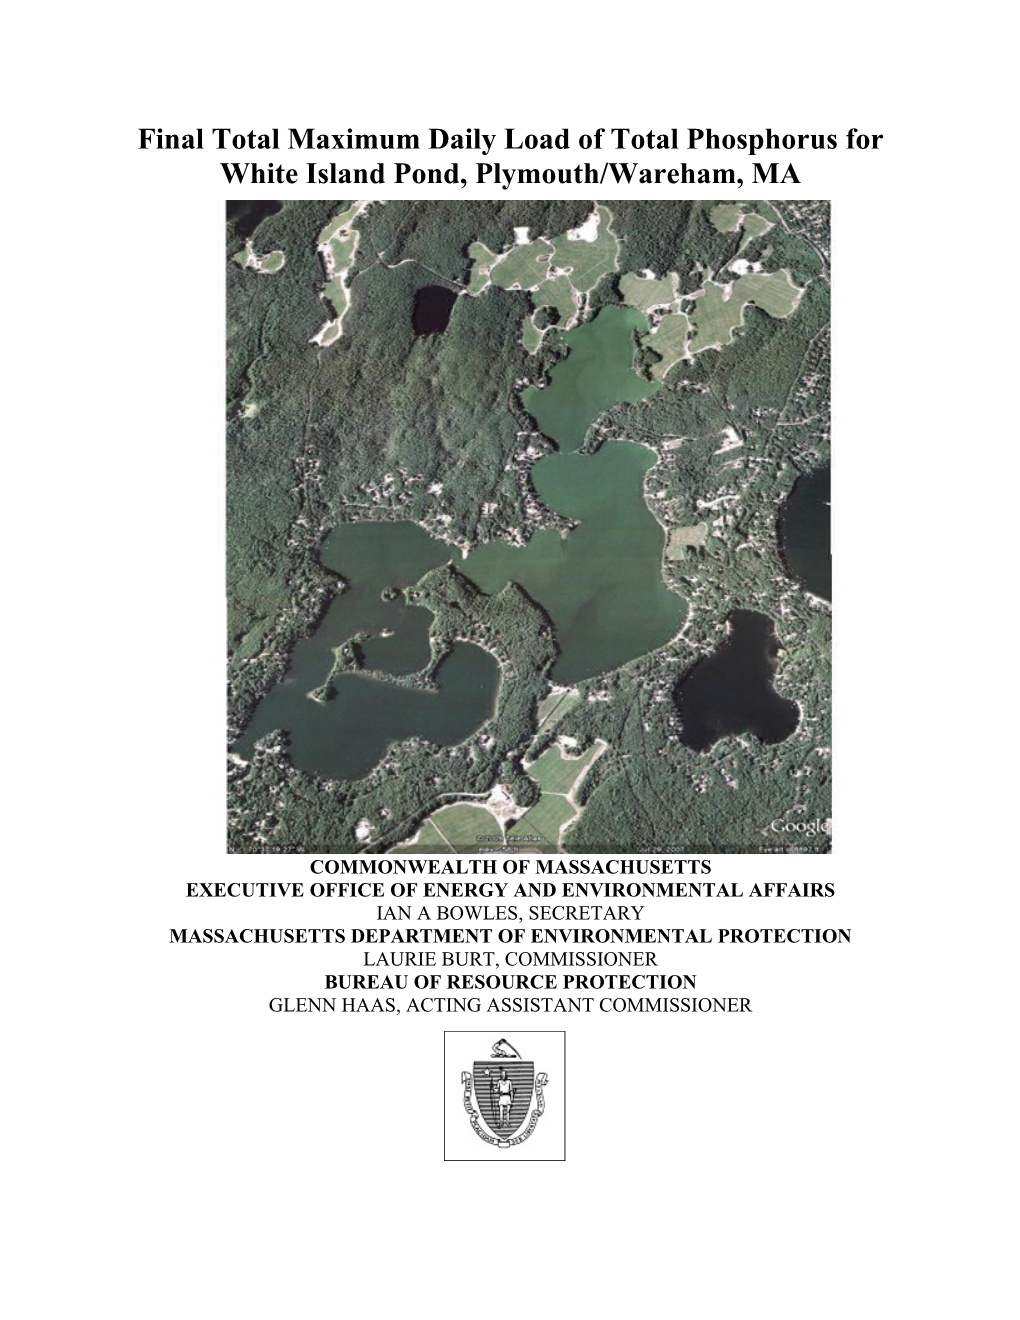 Final Total Maximum Daily Load of Total Phosphorus for White Island Pond, Plymouth/Wareham, MA